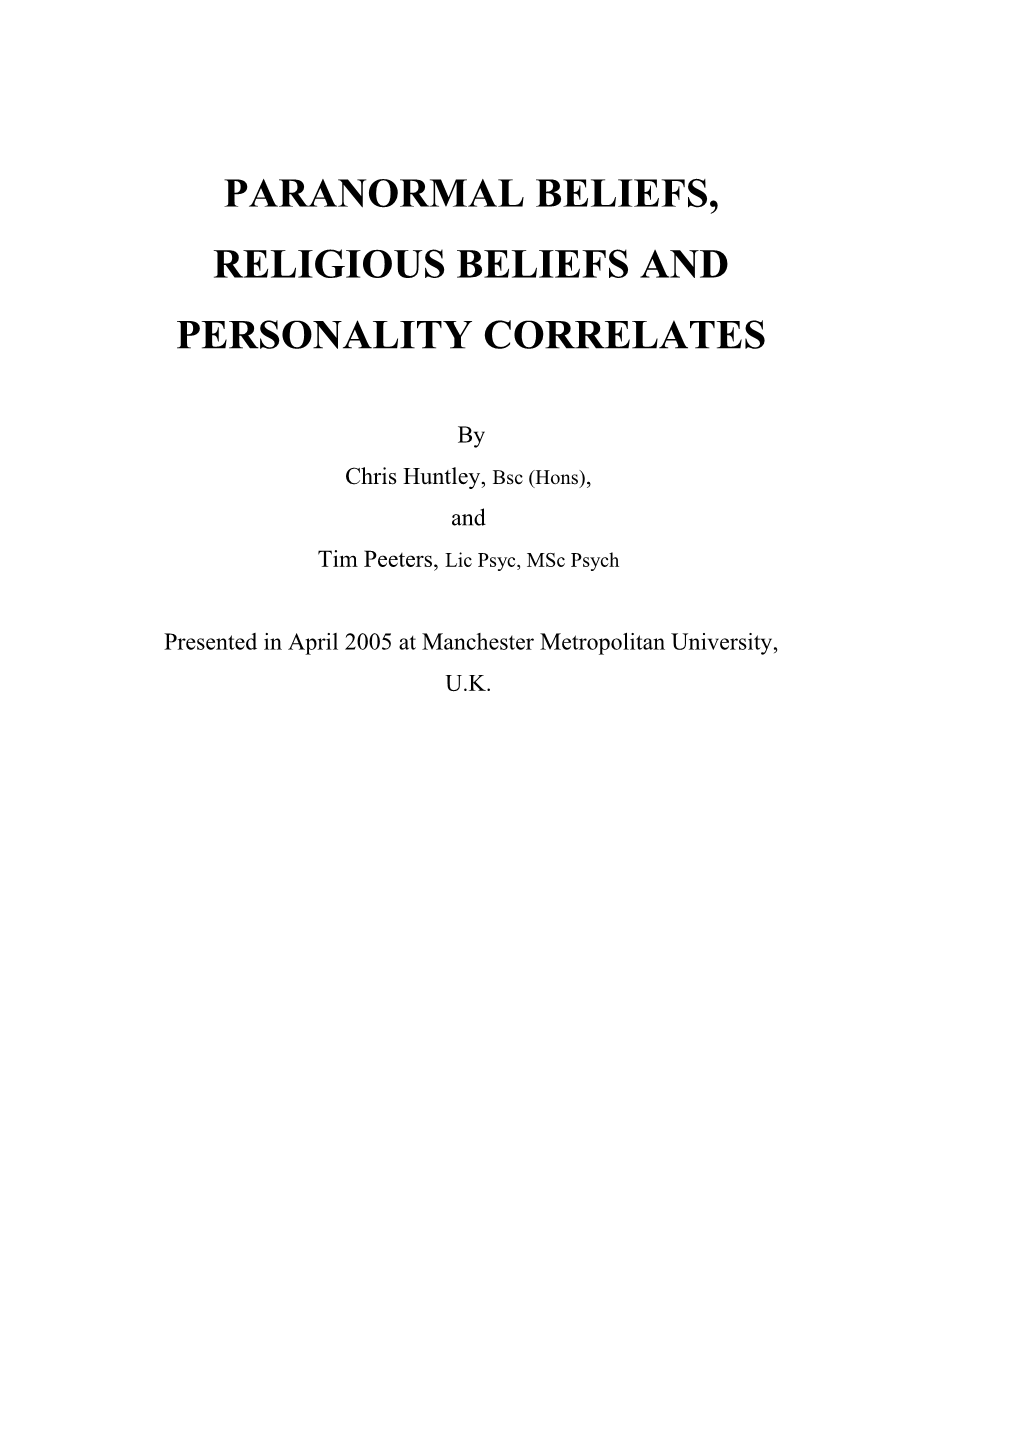 Paranormal Beliefs, Religious Beliefs and Personality Correlates